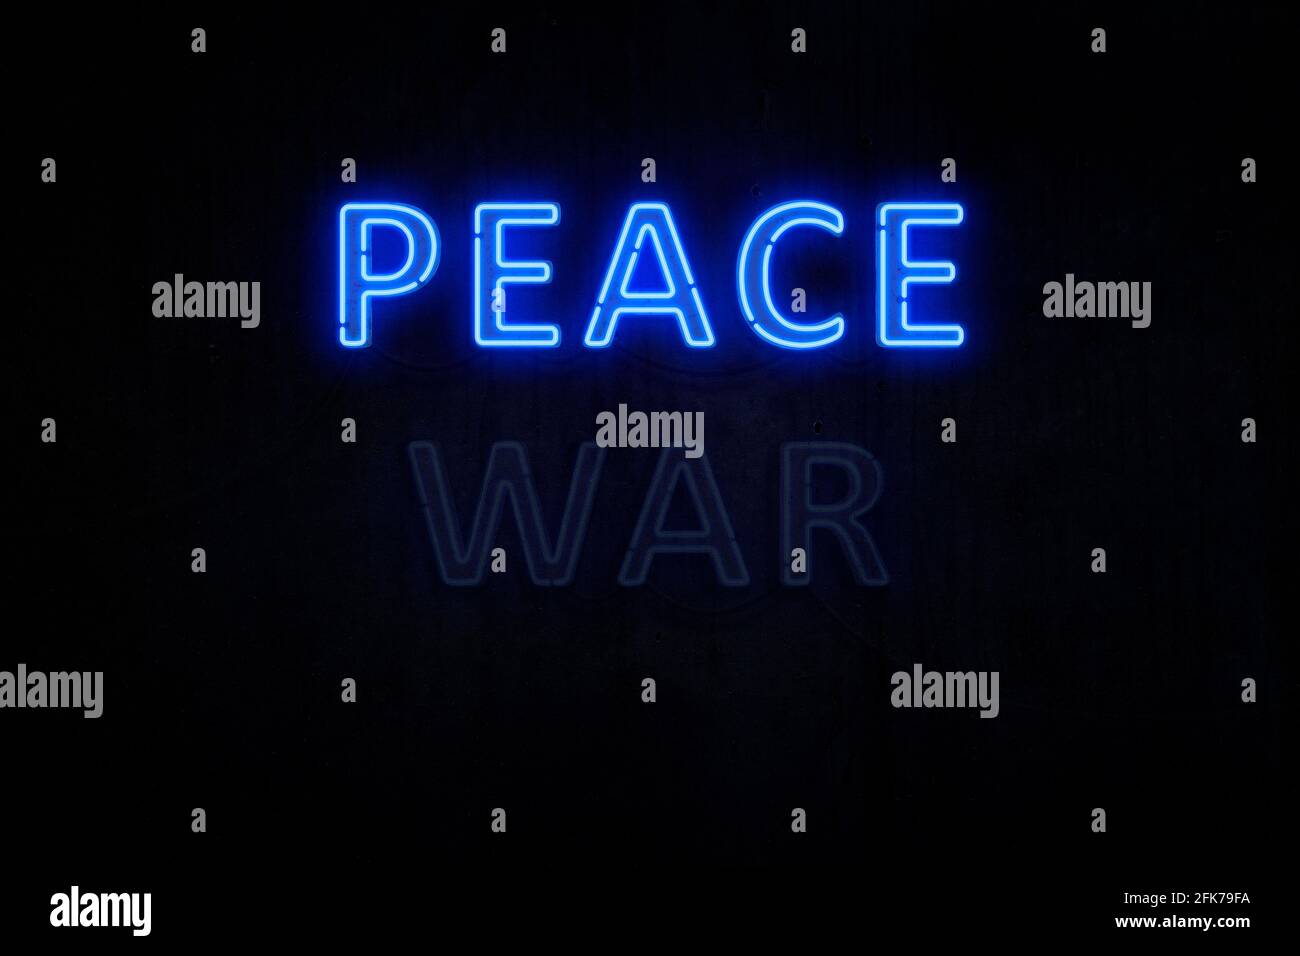 Illuminated and glowing blue 'PEACE' neon sign on dark, almost black, wall background. 'WAR' neon sign is off. Concept of how peace wins over war. Stock Photo